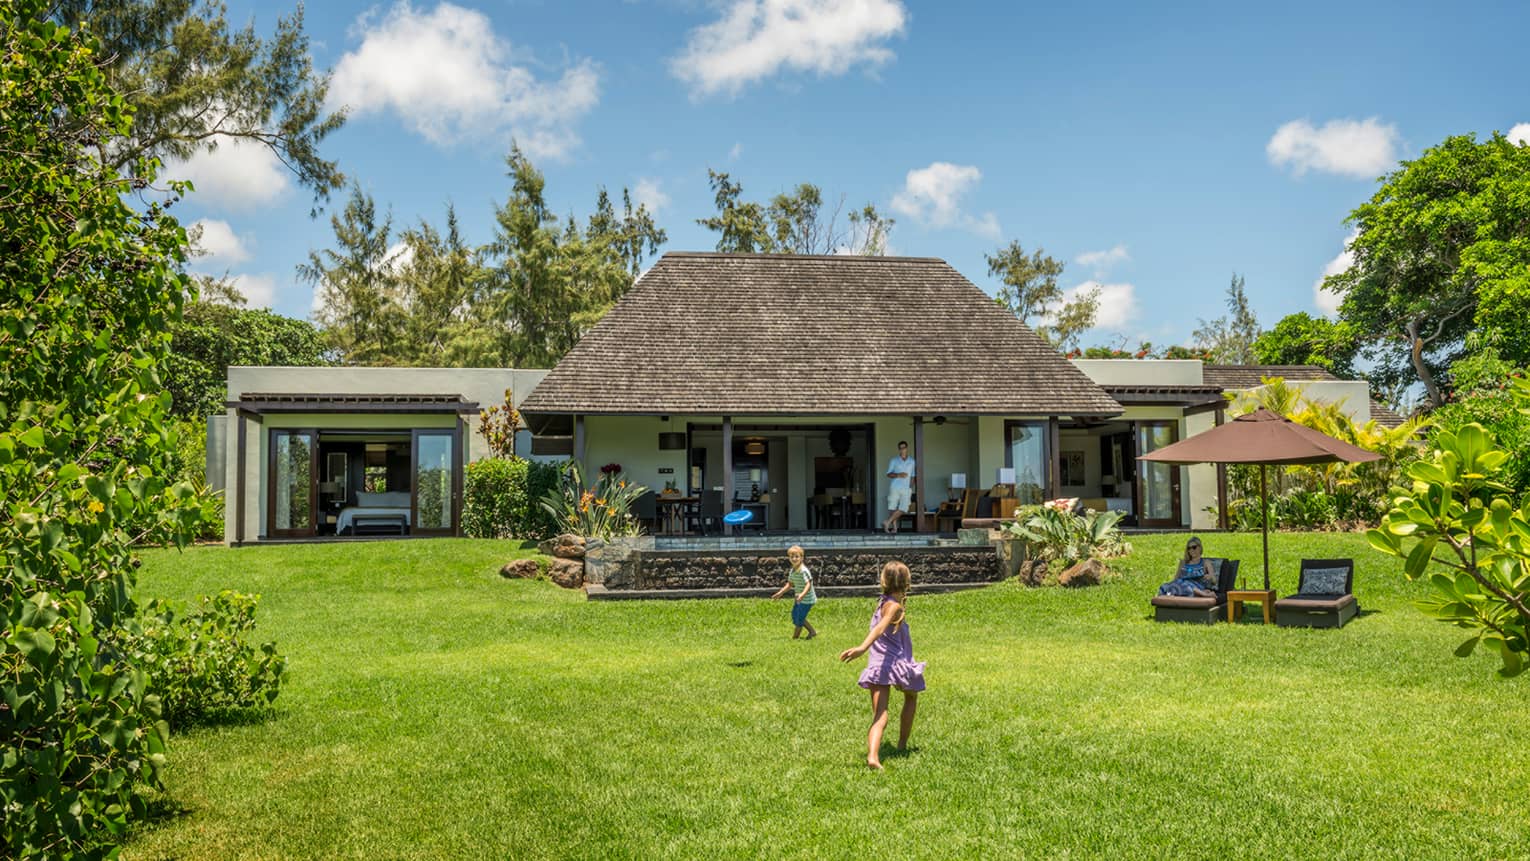 Young children play on green lawn in front of bungalow as dad watches from covered patio